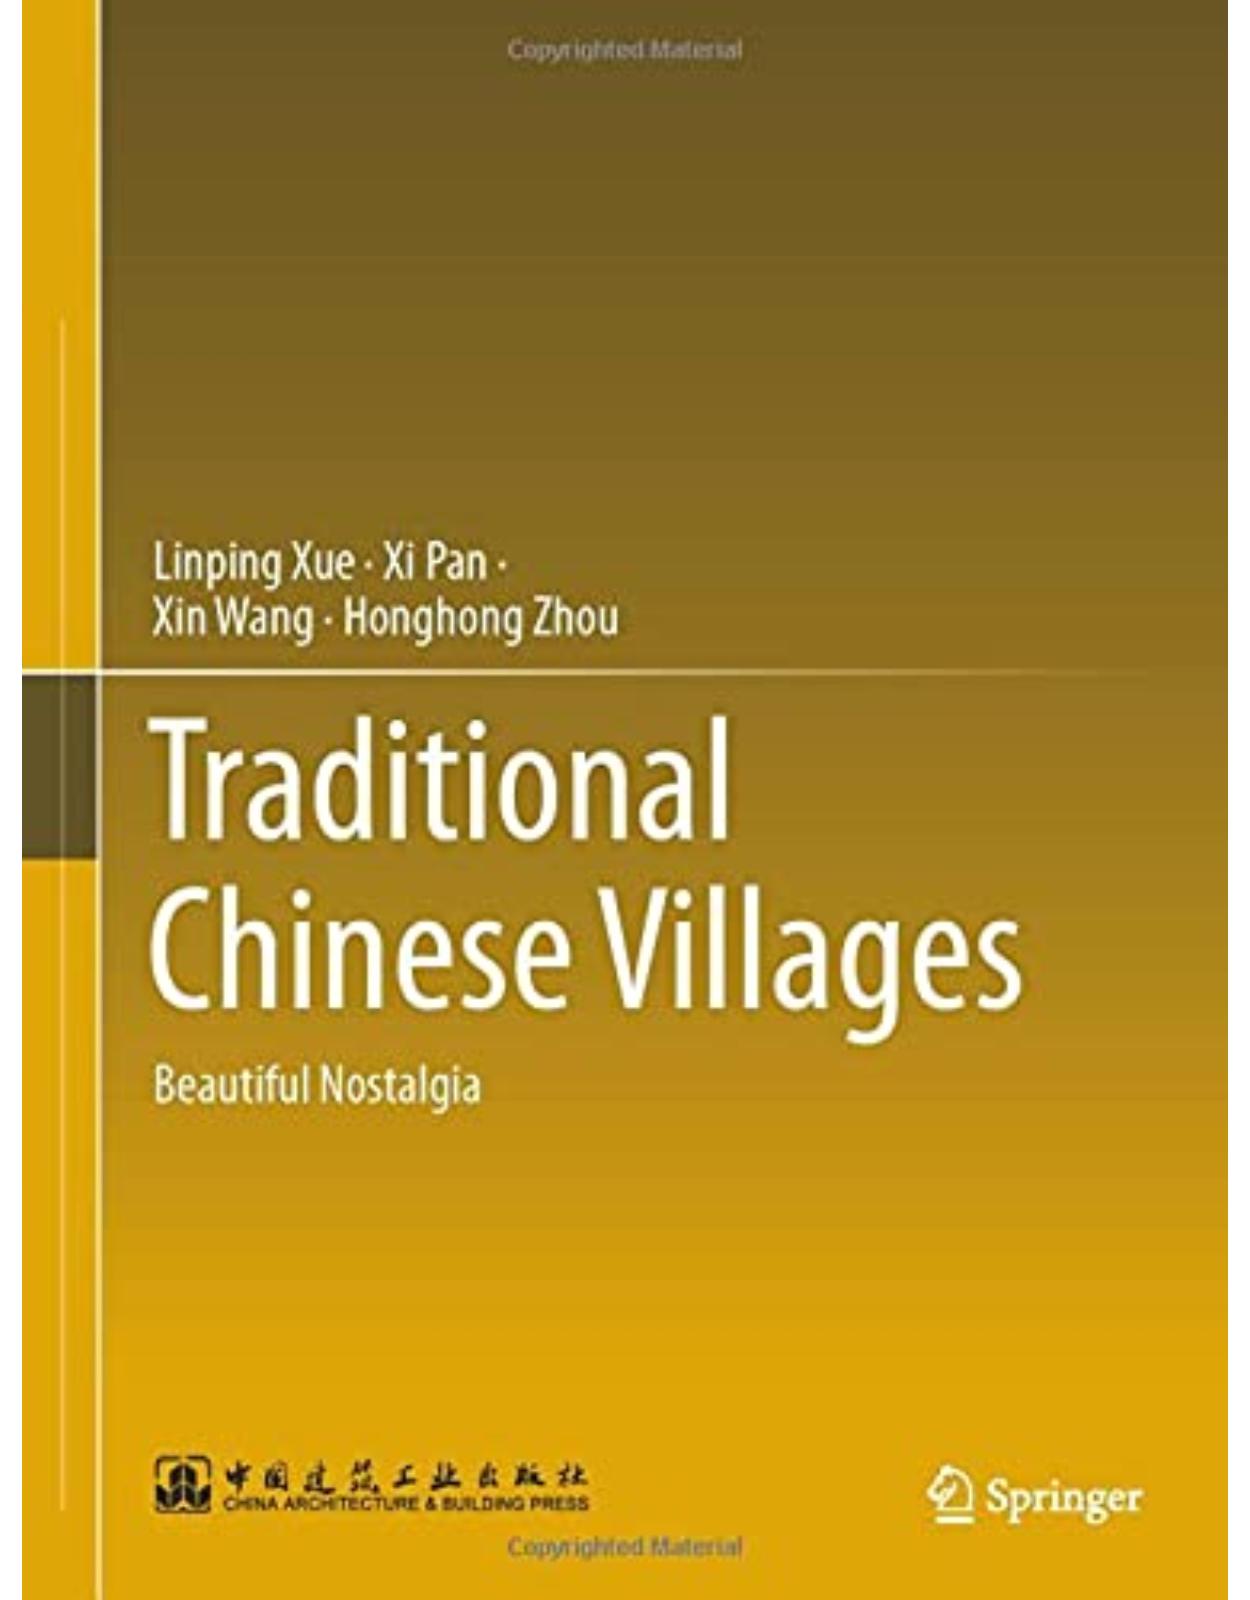 Traditional Chinese Villages: Beautiful Nostalgia